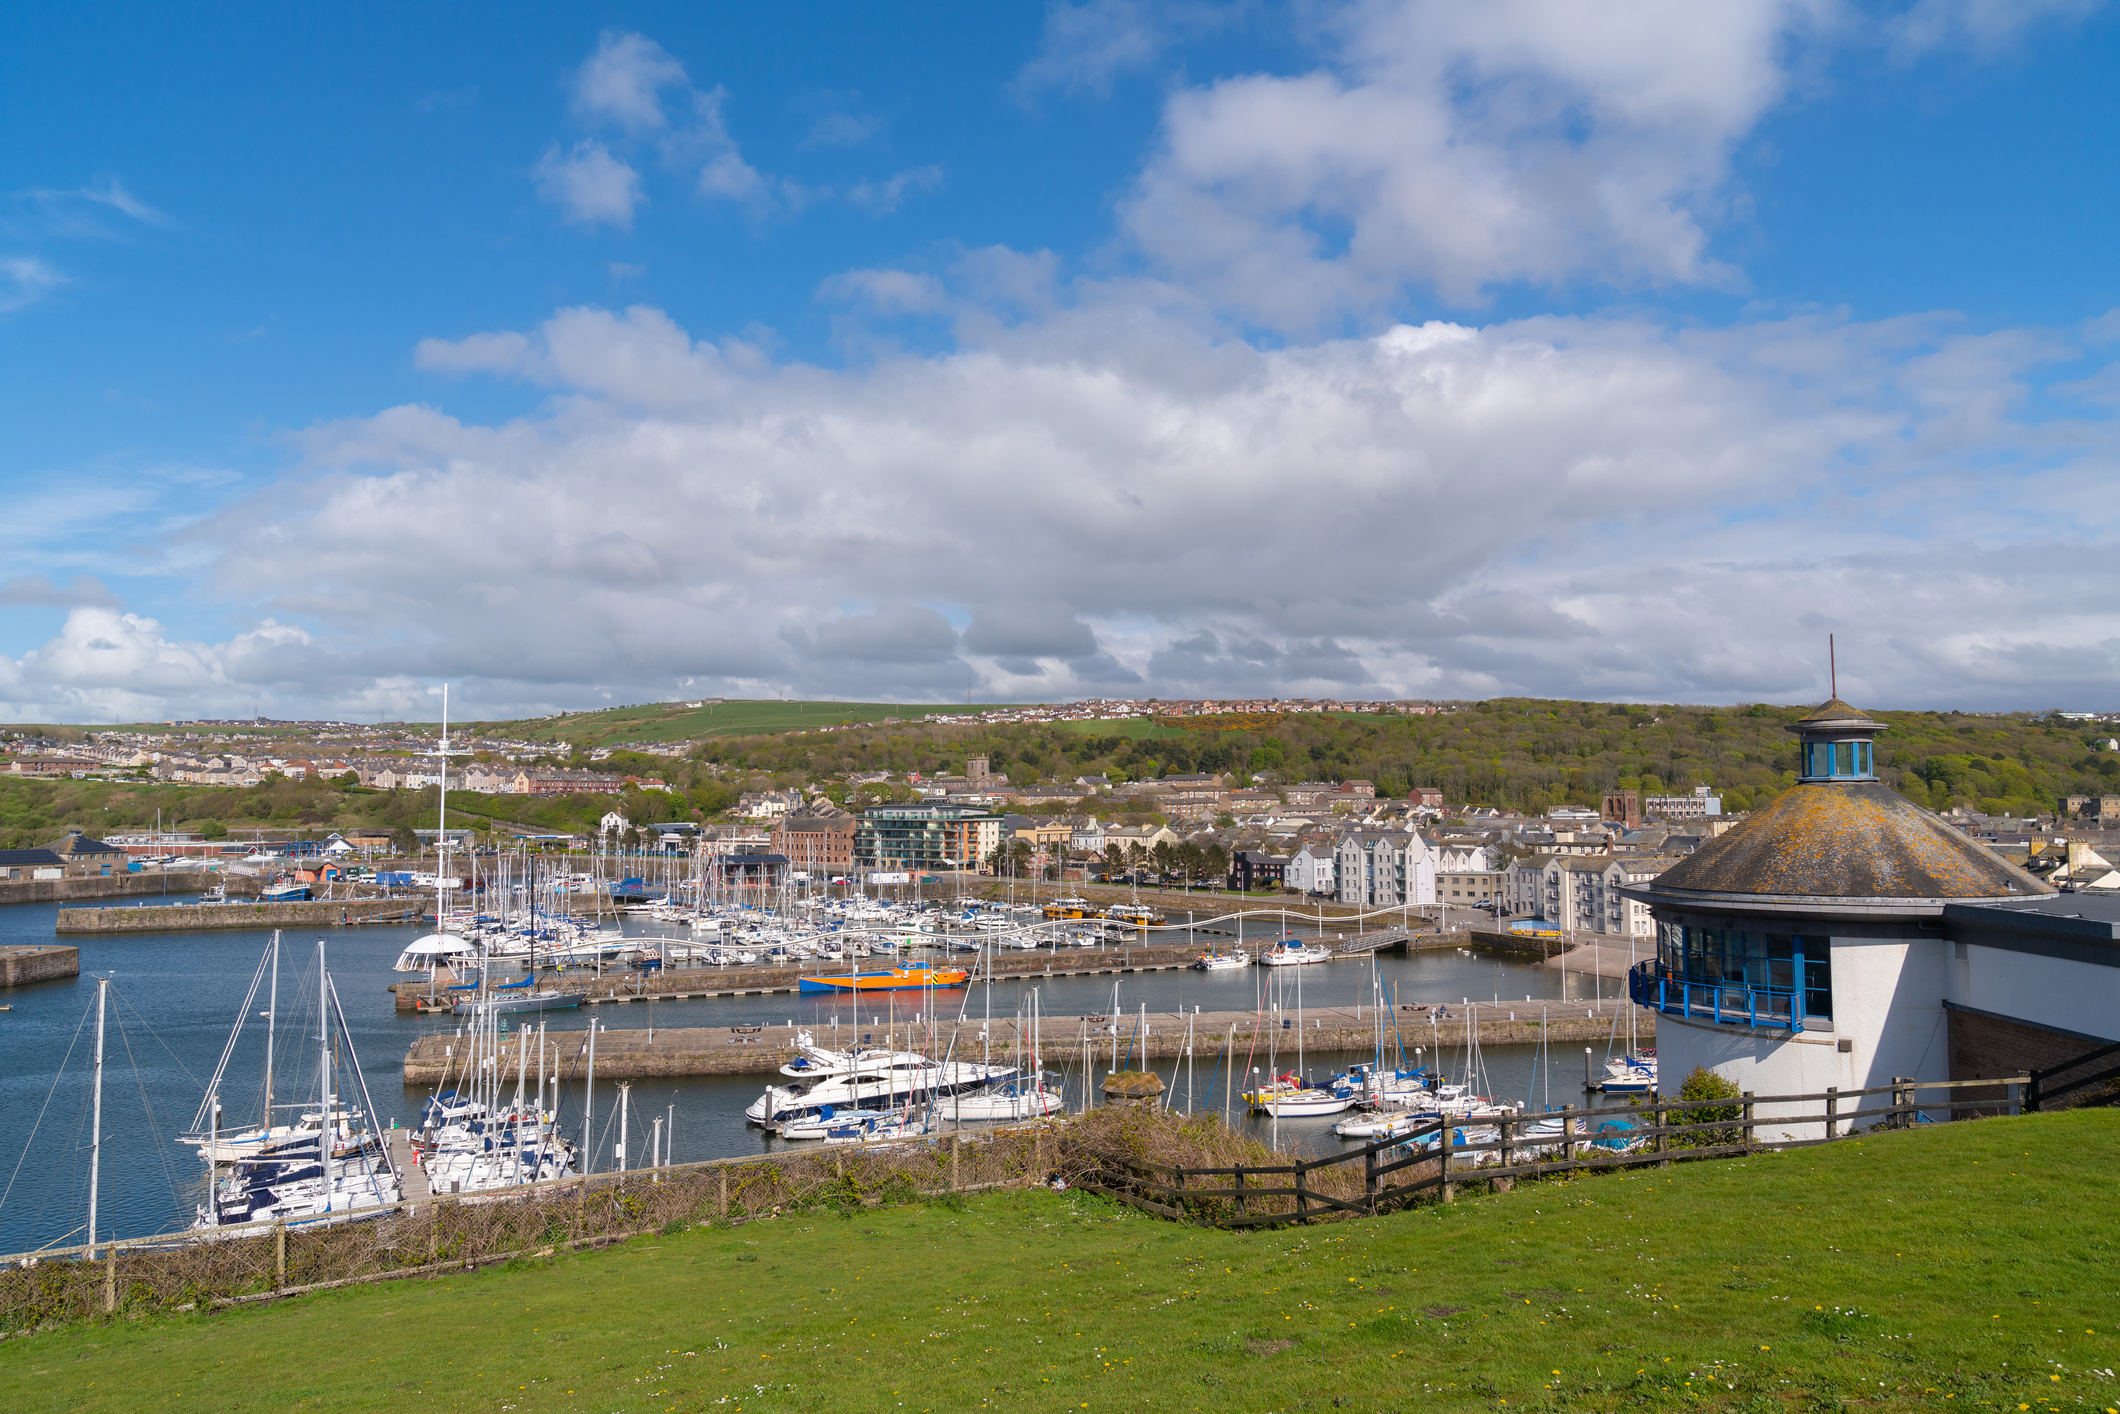 The coastal town of Whitehaven in Cumbria